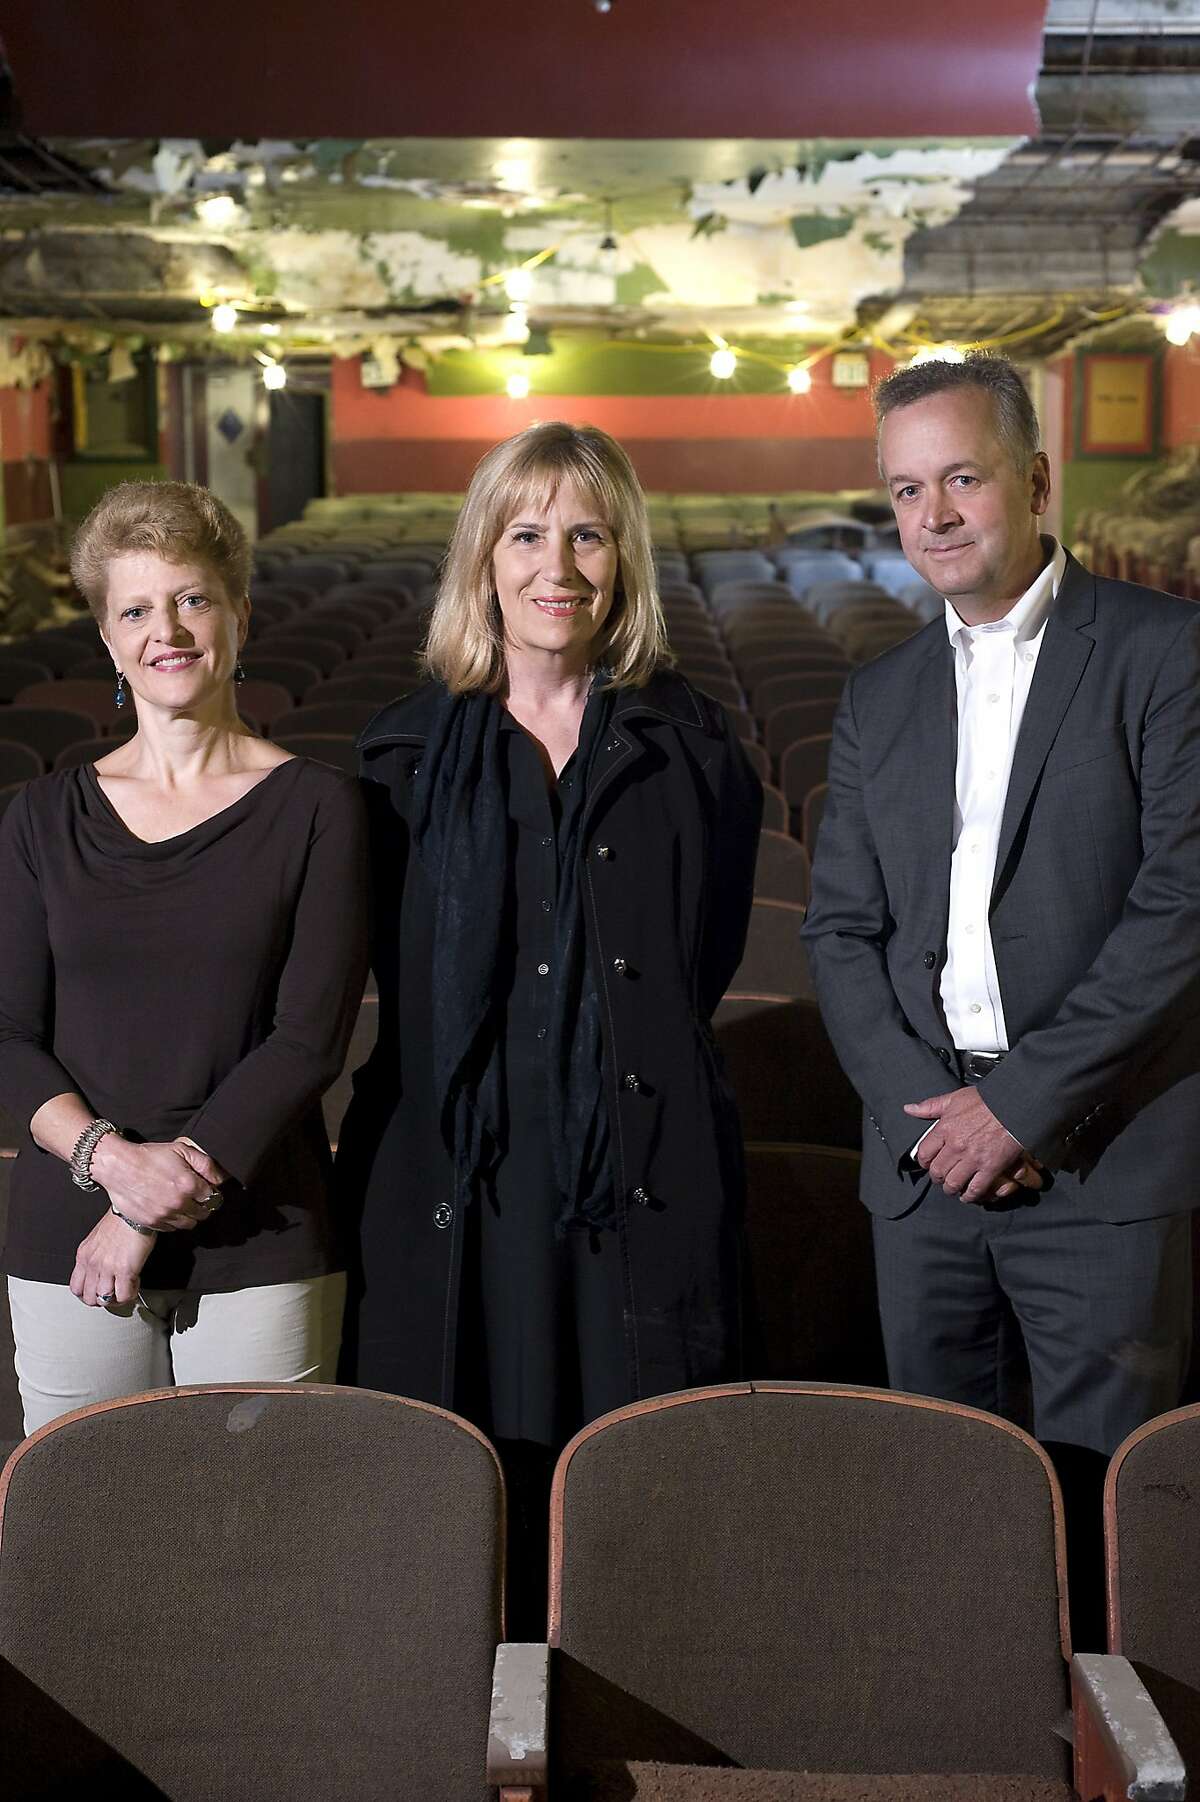 (L-R)ACT Artistic Director Carey Perloff, ACT Executive Director Ellen Richard, and architect Michael Duncan pose for a portrait in The Strand theater in San Francisco, CA Friday July 12th, 2013. The Strand movie theater on the skid row stretch of Mid-Market Street, has been bought by ACT and will be converted to a stage for dramatic performance.